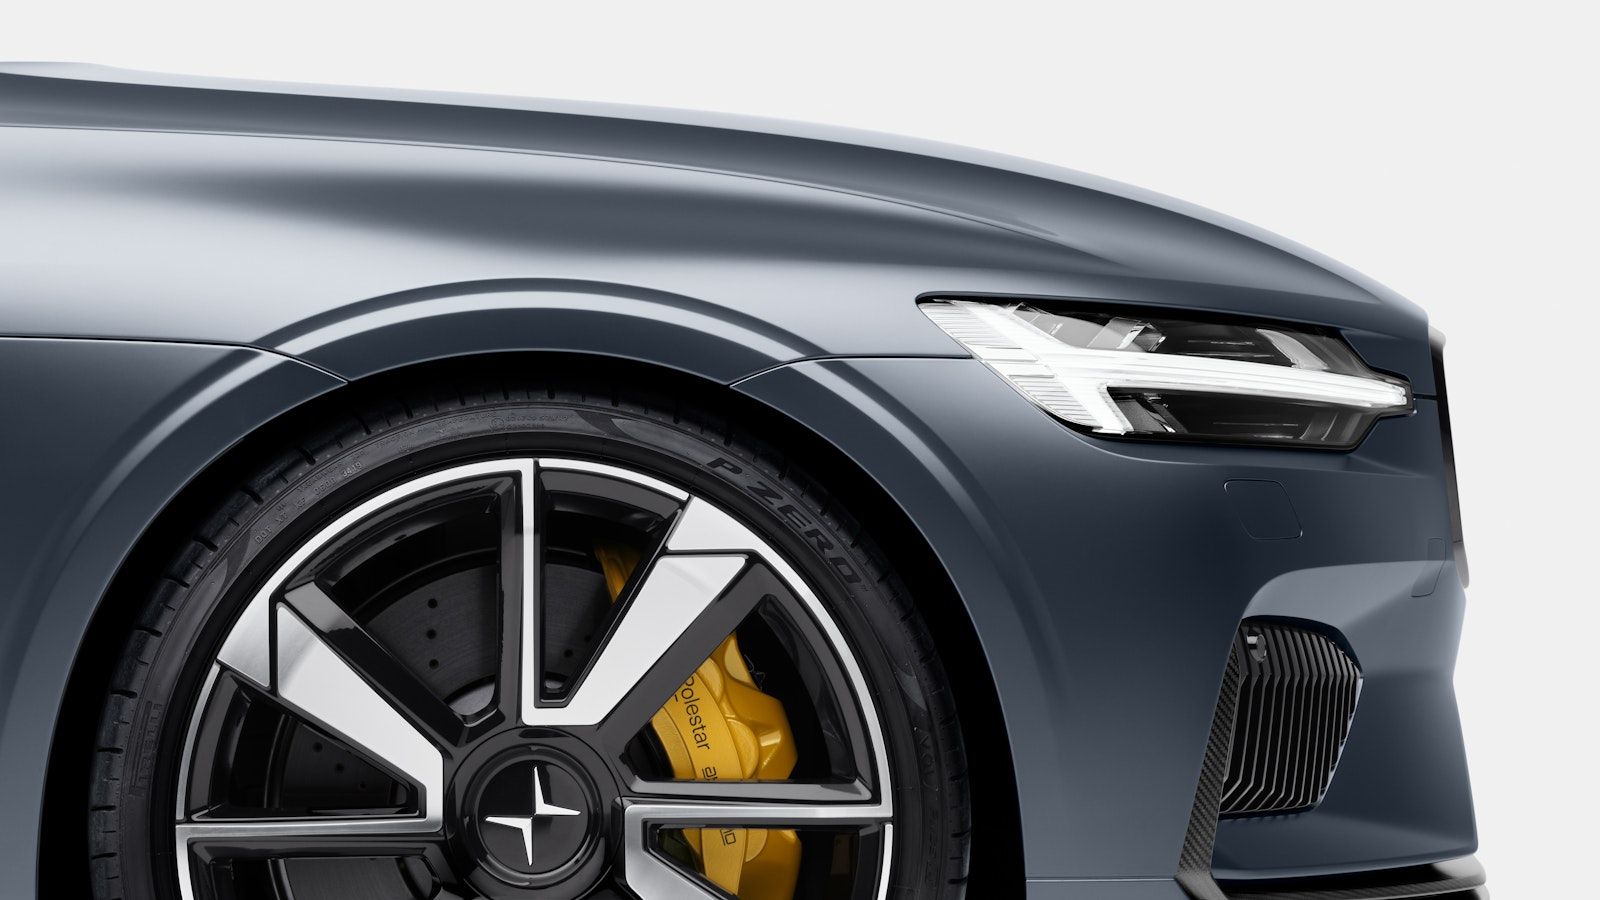 The wheels, rims and front disc brakes on a blue Polestar 1